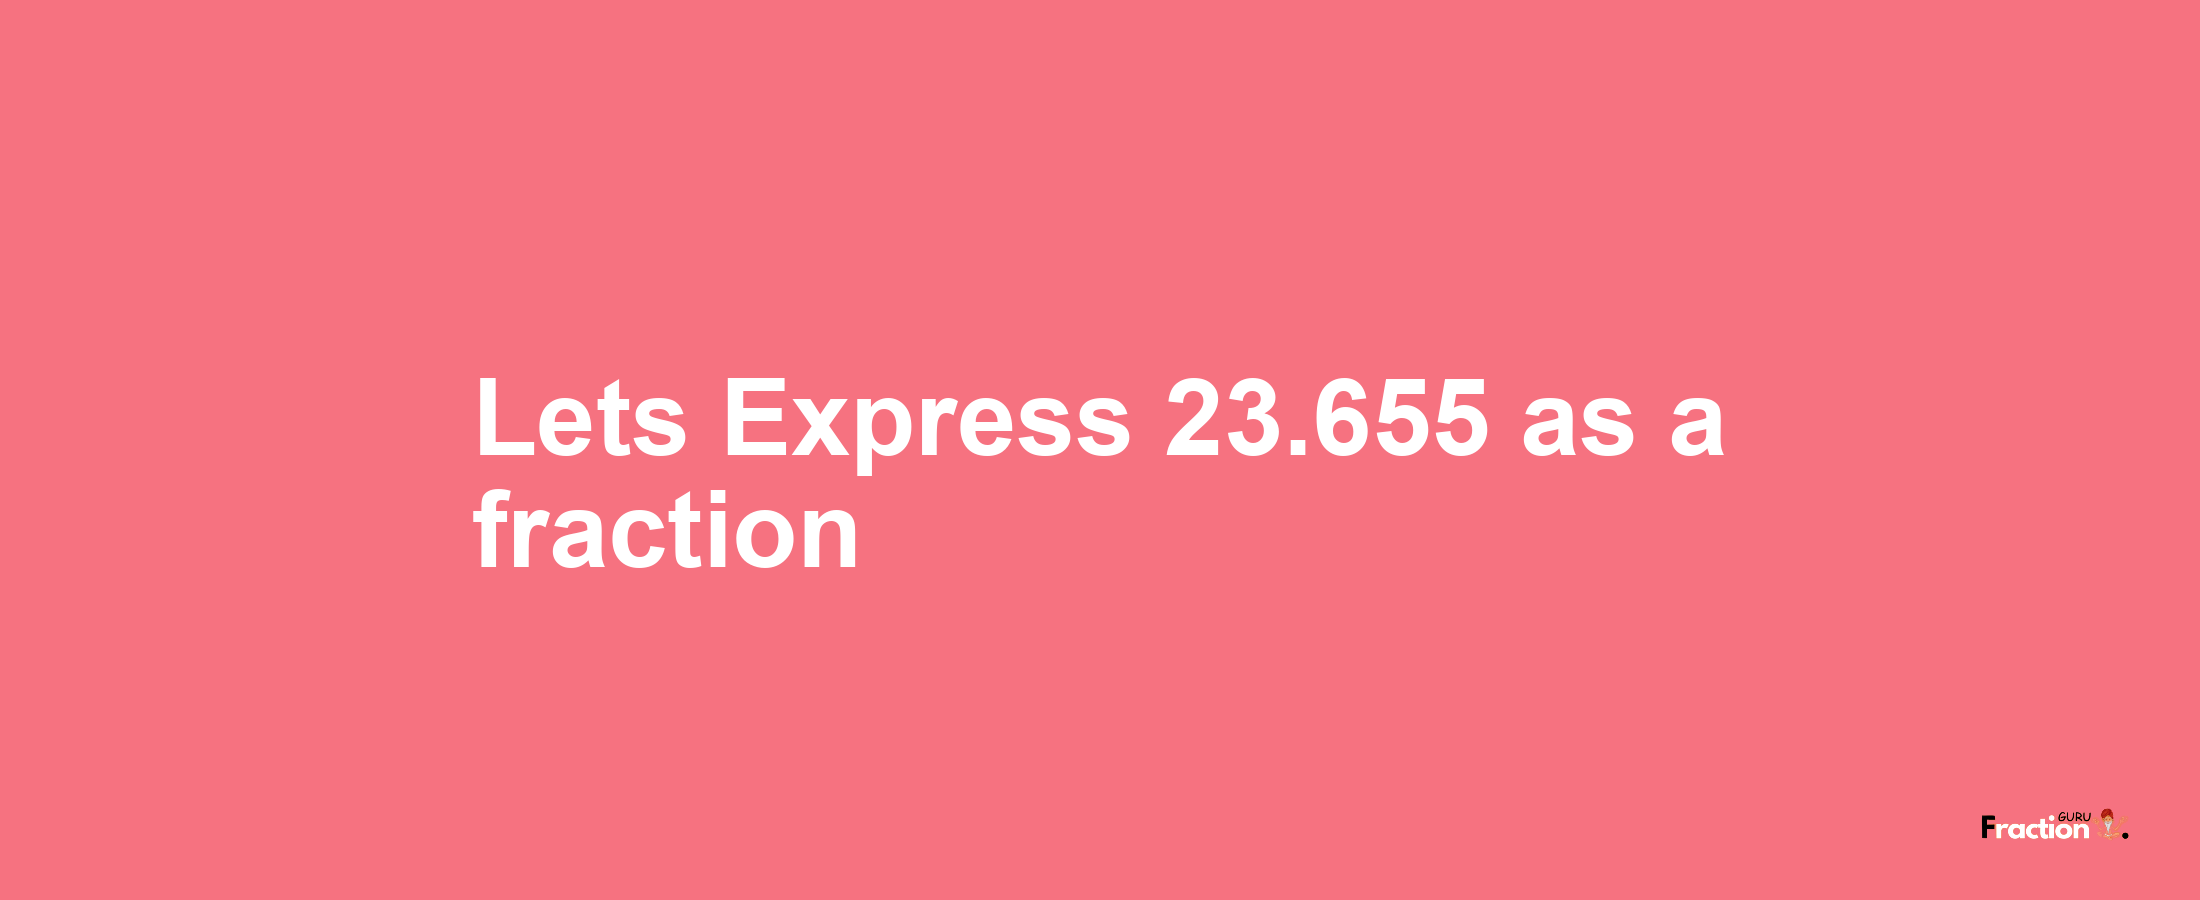 Lets Express 23.655 as afraction